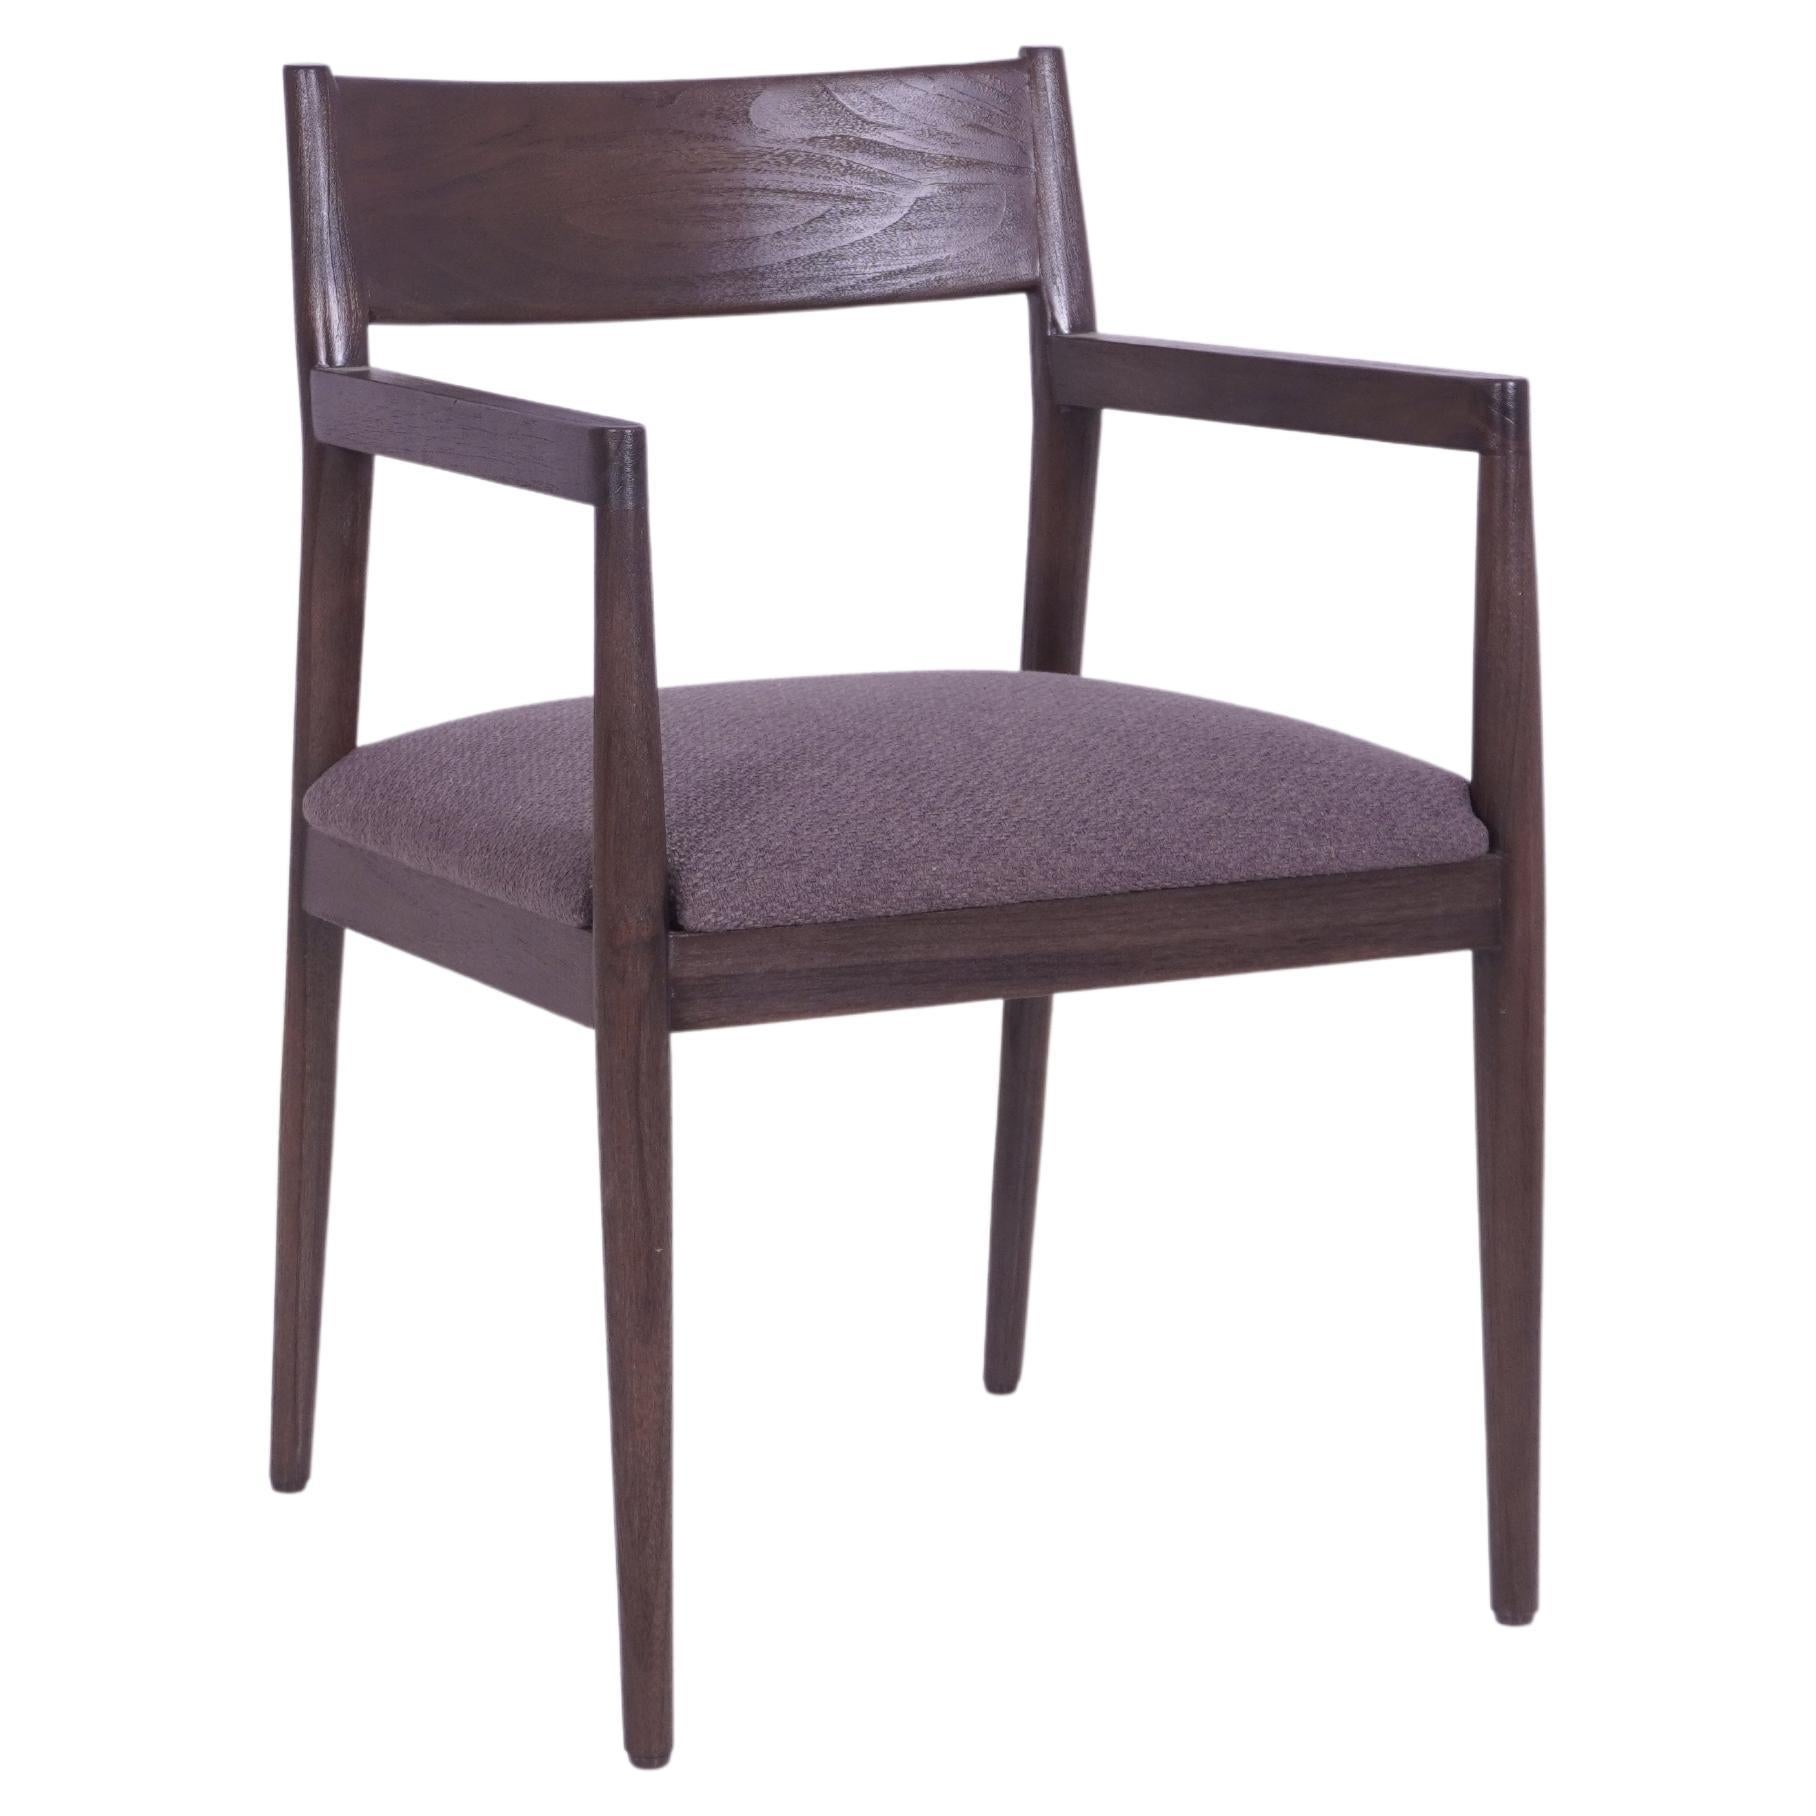 Harper Dining Chair Armchair, Teak Wood in a Walnut Finish. Set of 6 chairs For Sale